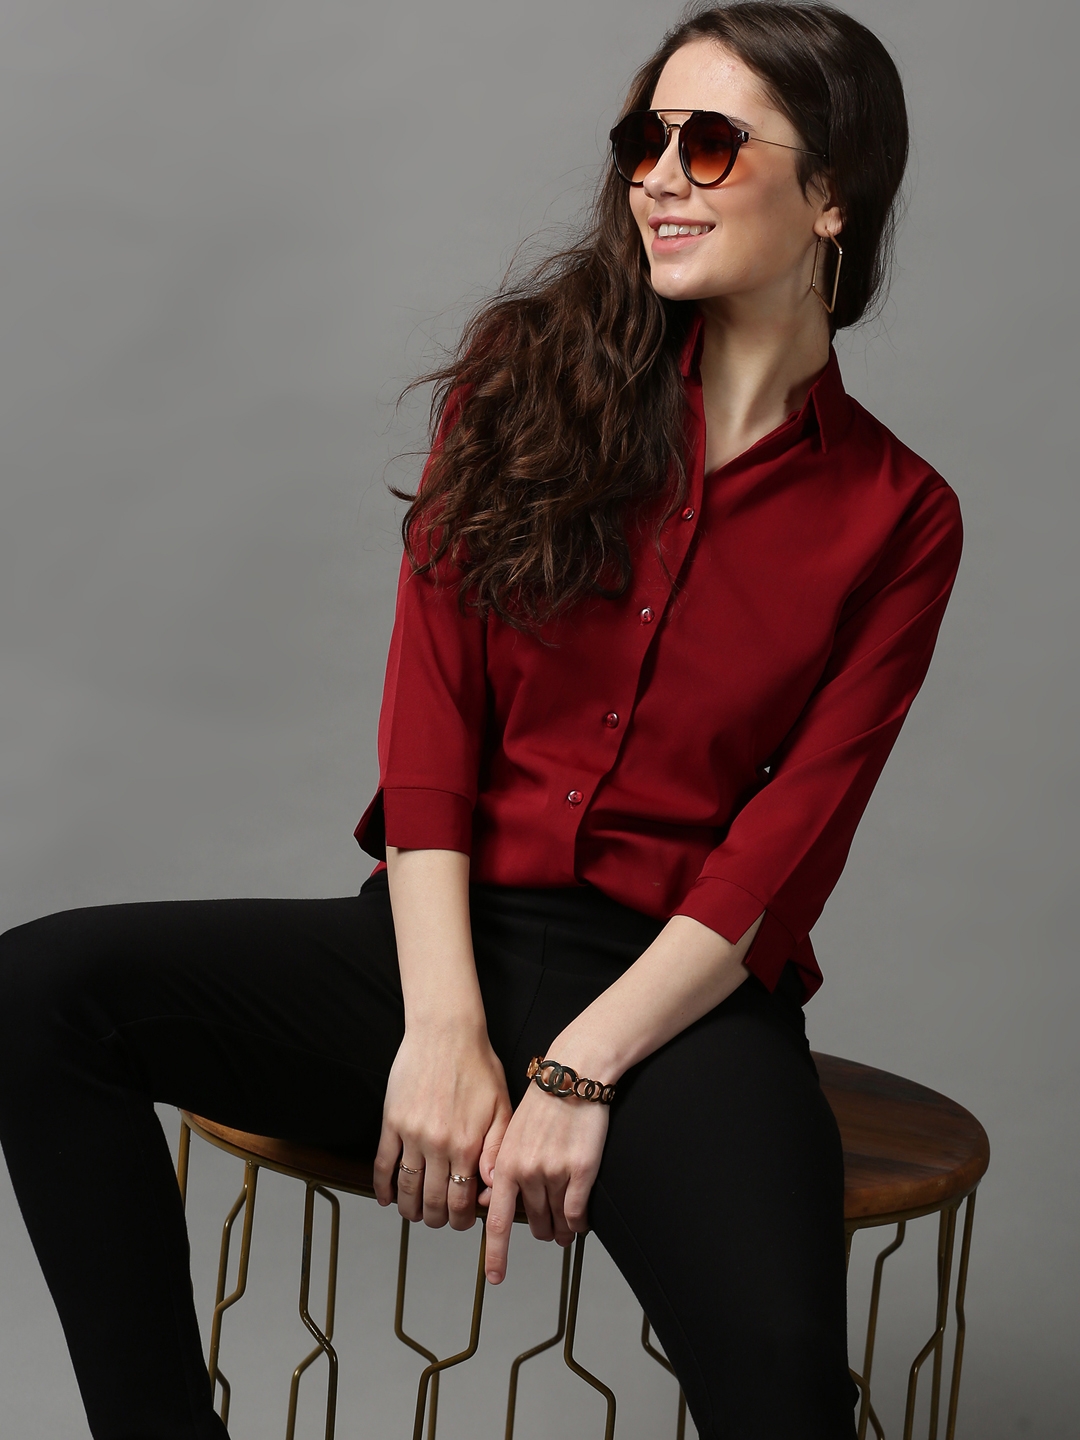 SHOWOFF Women's Spread Collar Solid Maroon Polyester Shirt